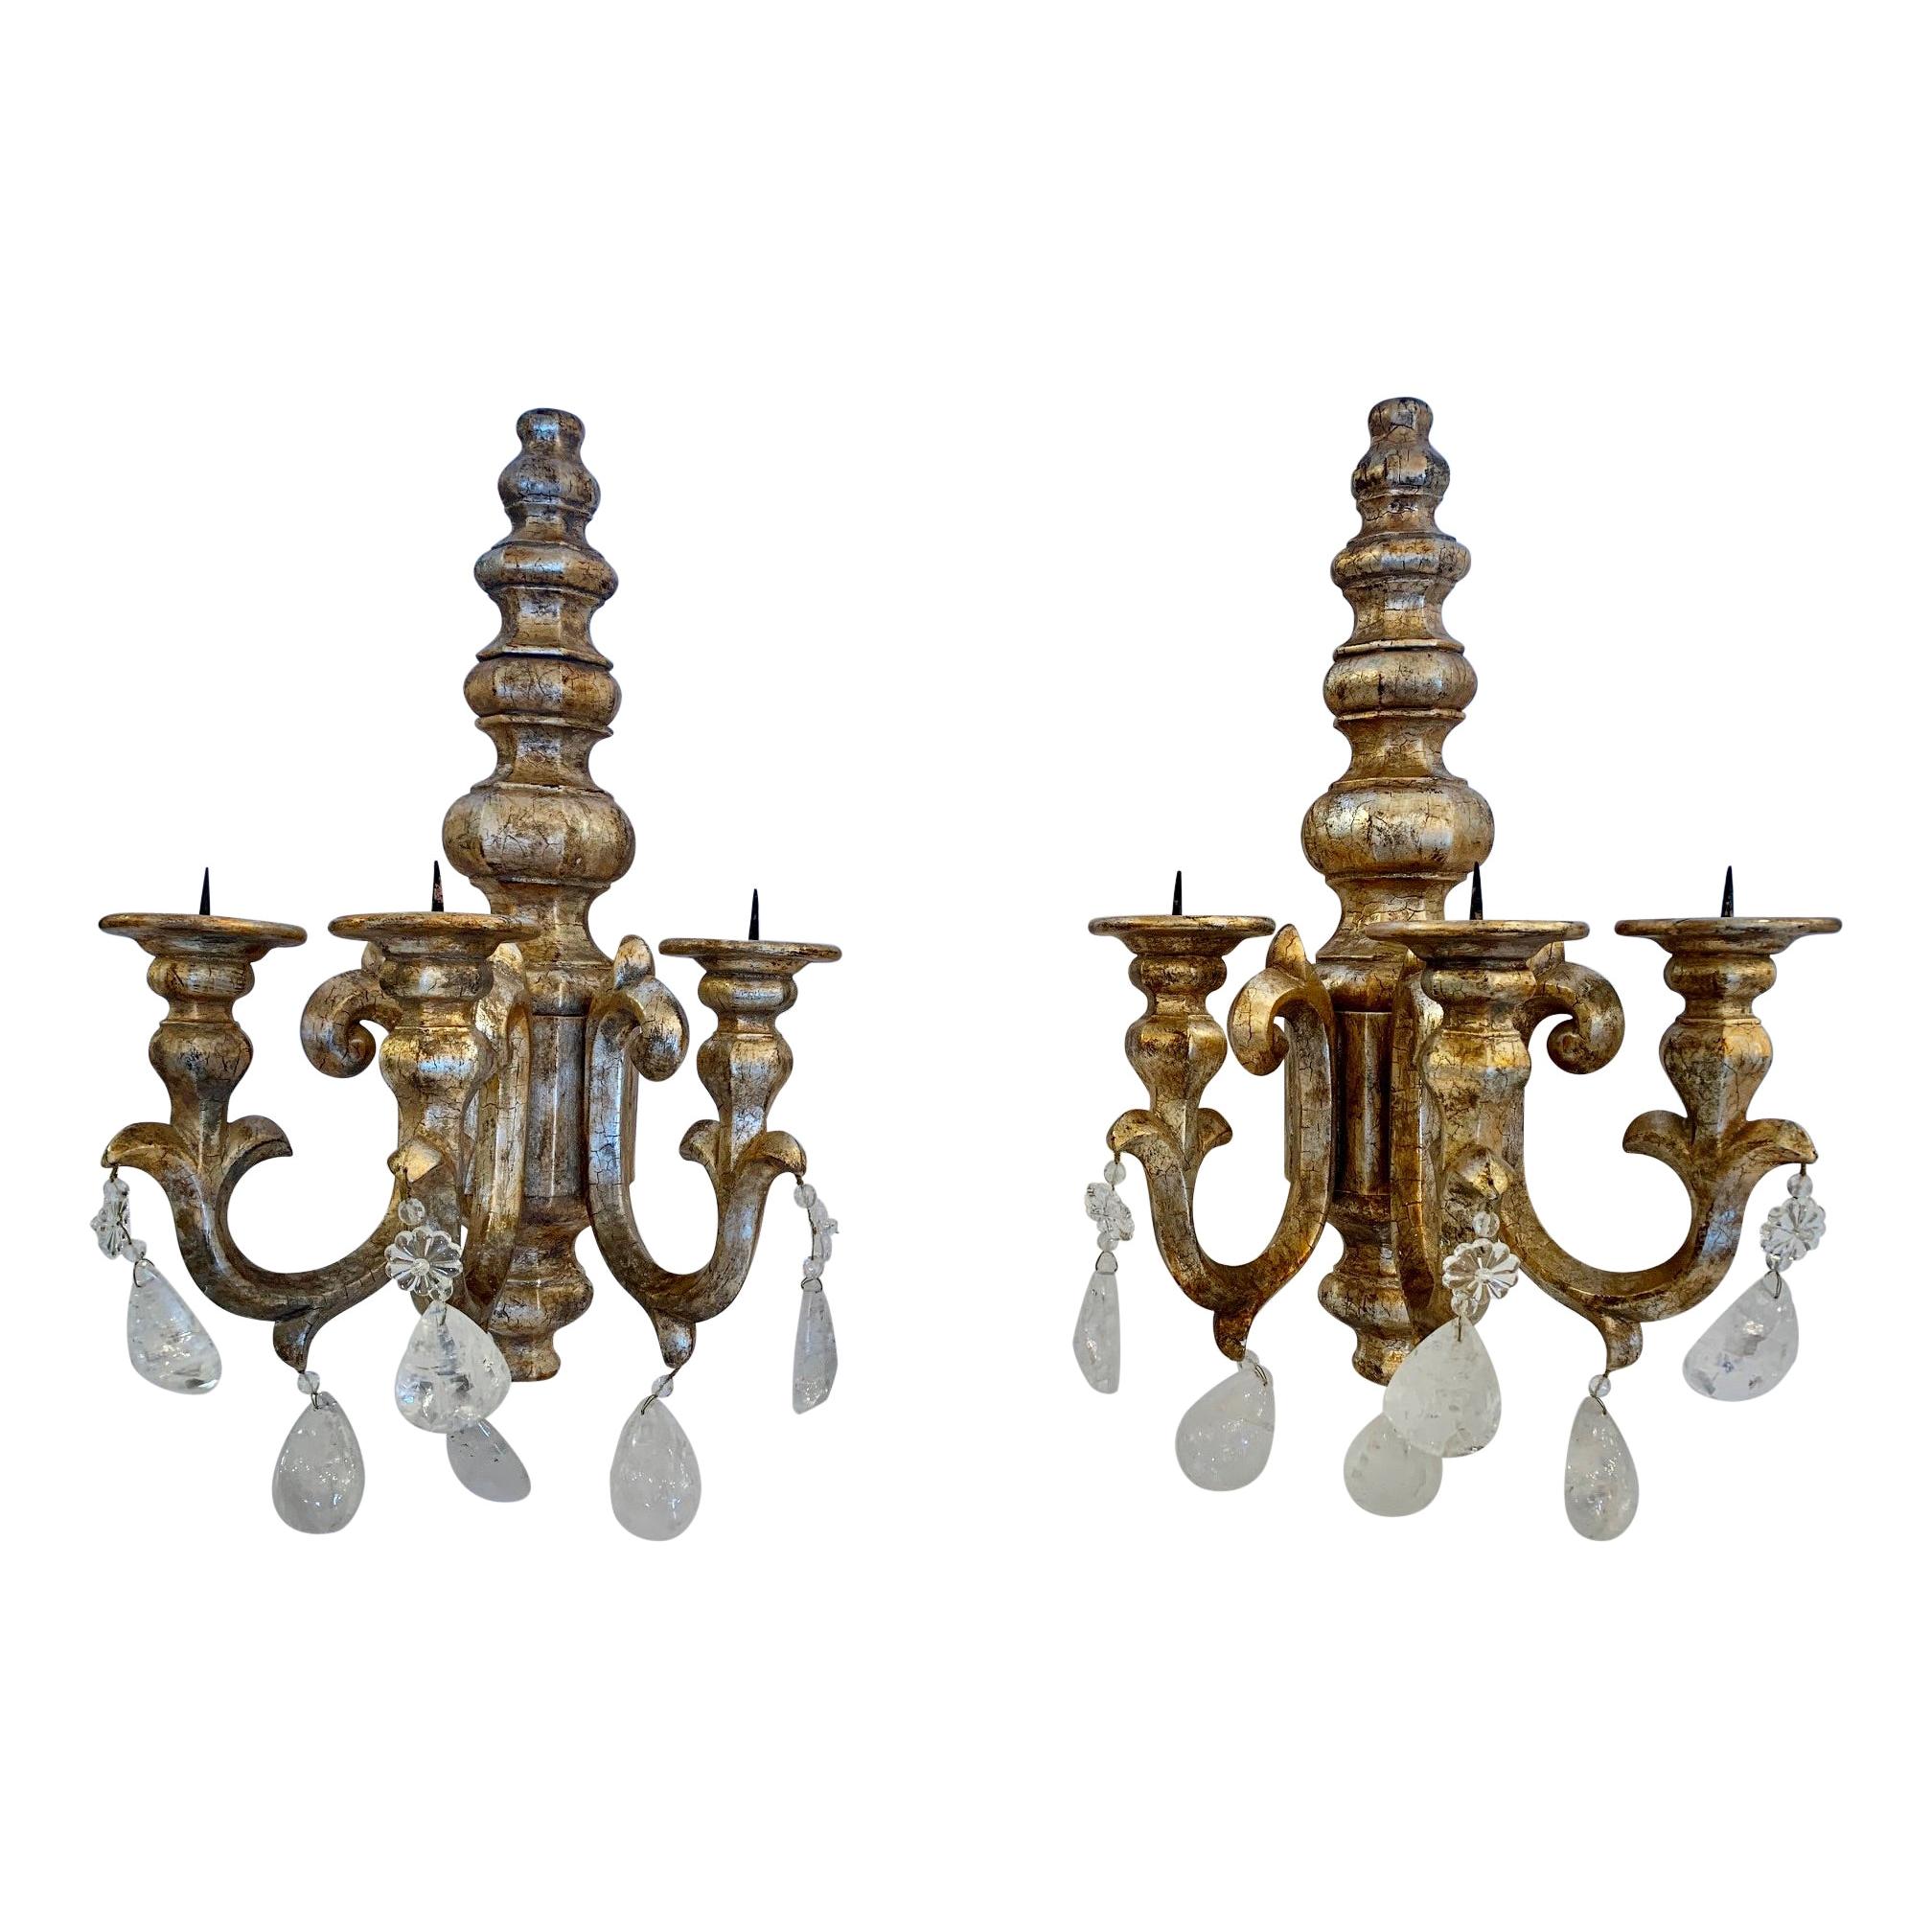 Fabulous Chunky Pair of Designer Giltwood Candle Sconces